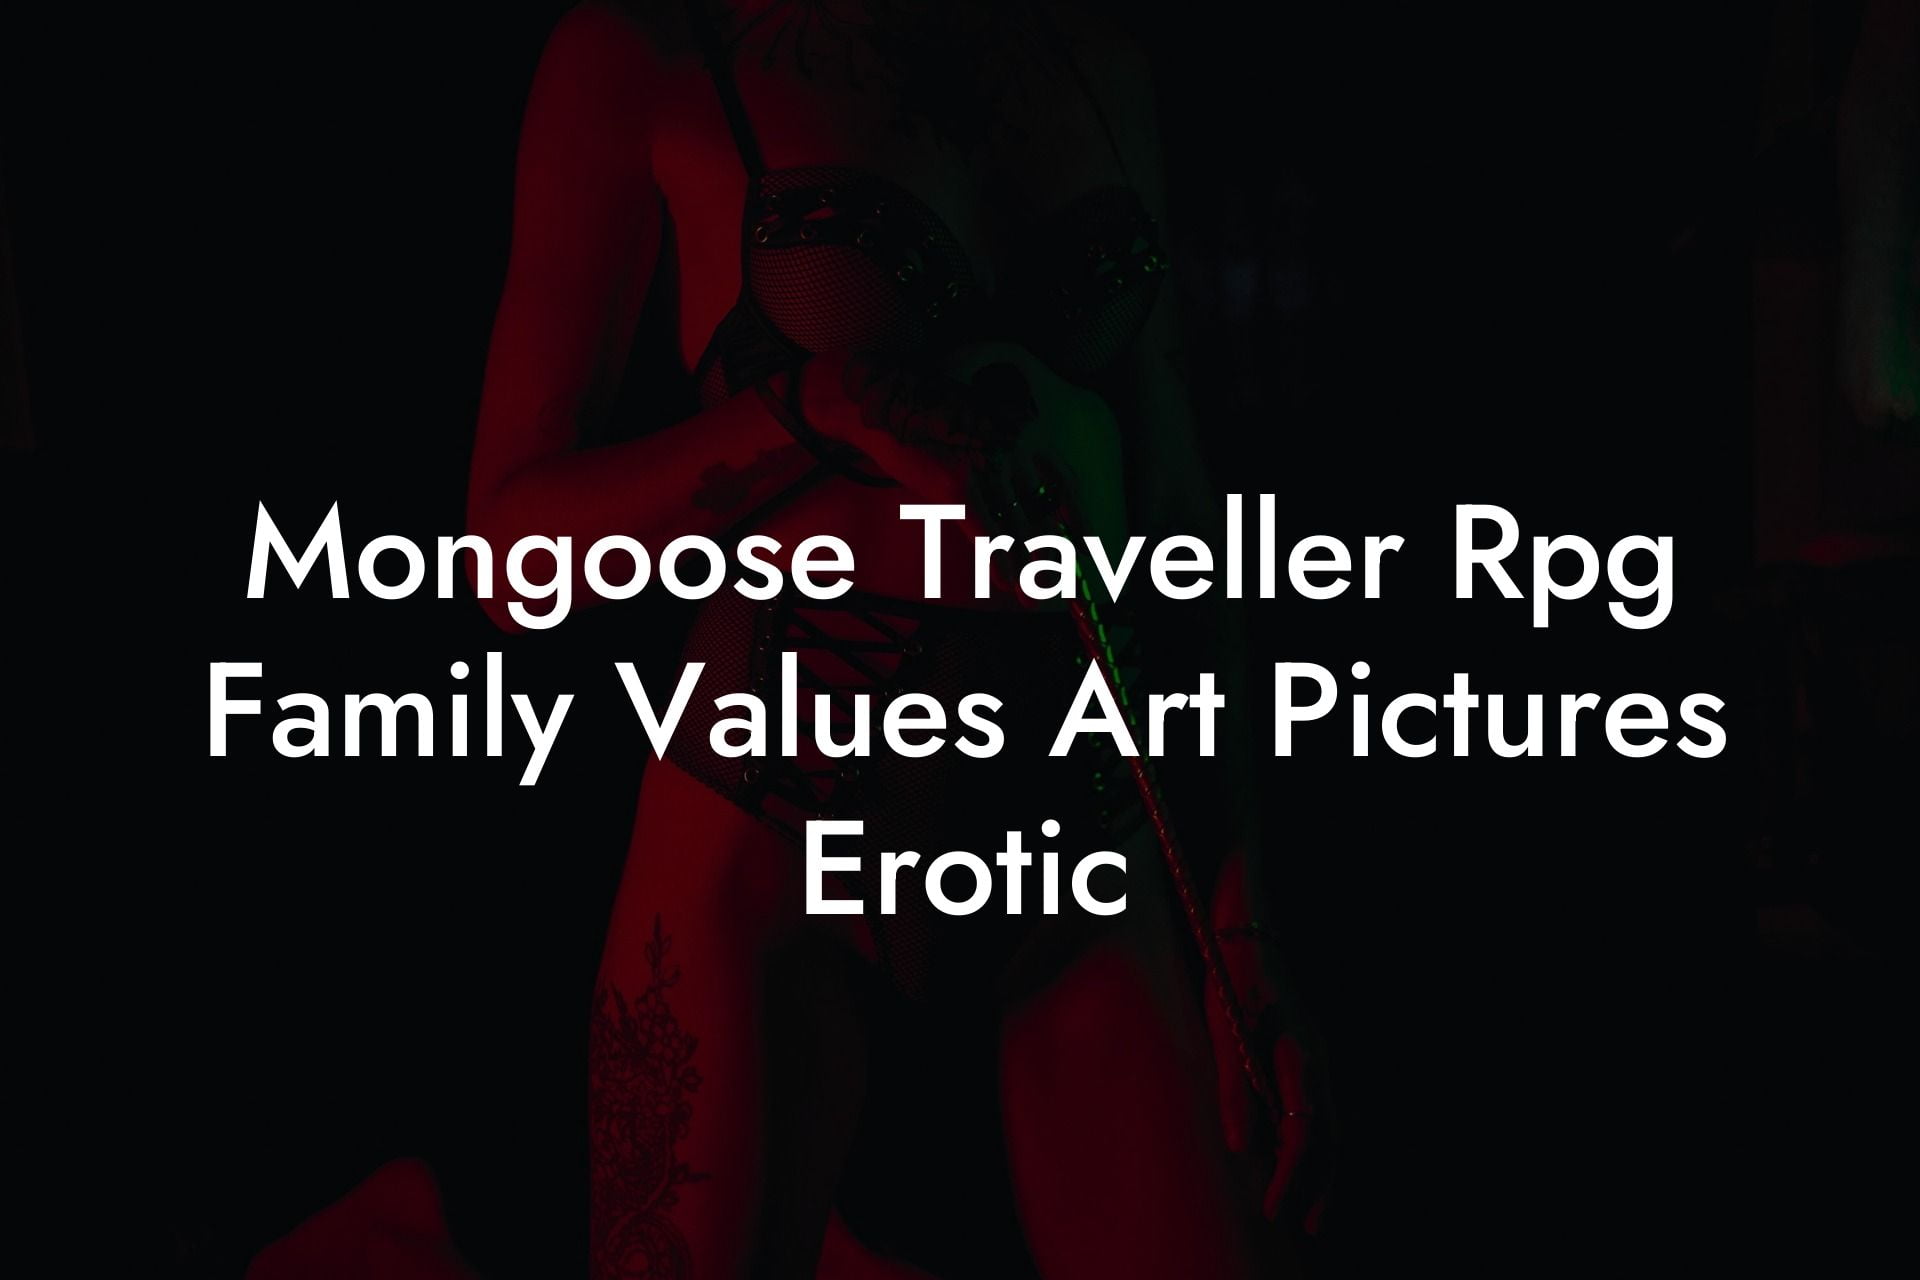 Mongoose Traveller Rpg Family Values Art Pictures Erotic